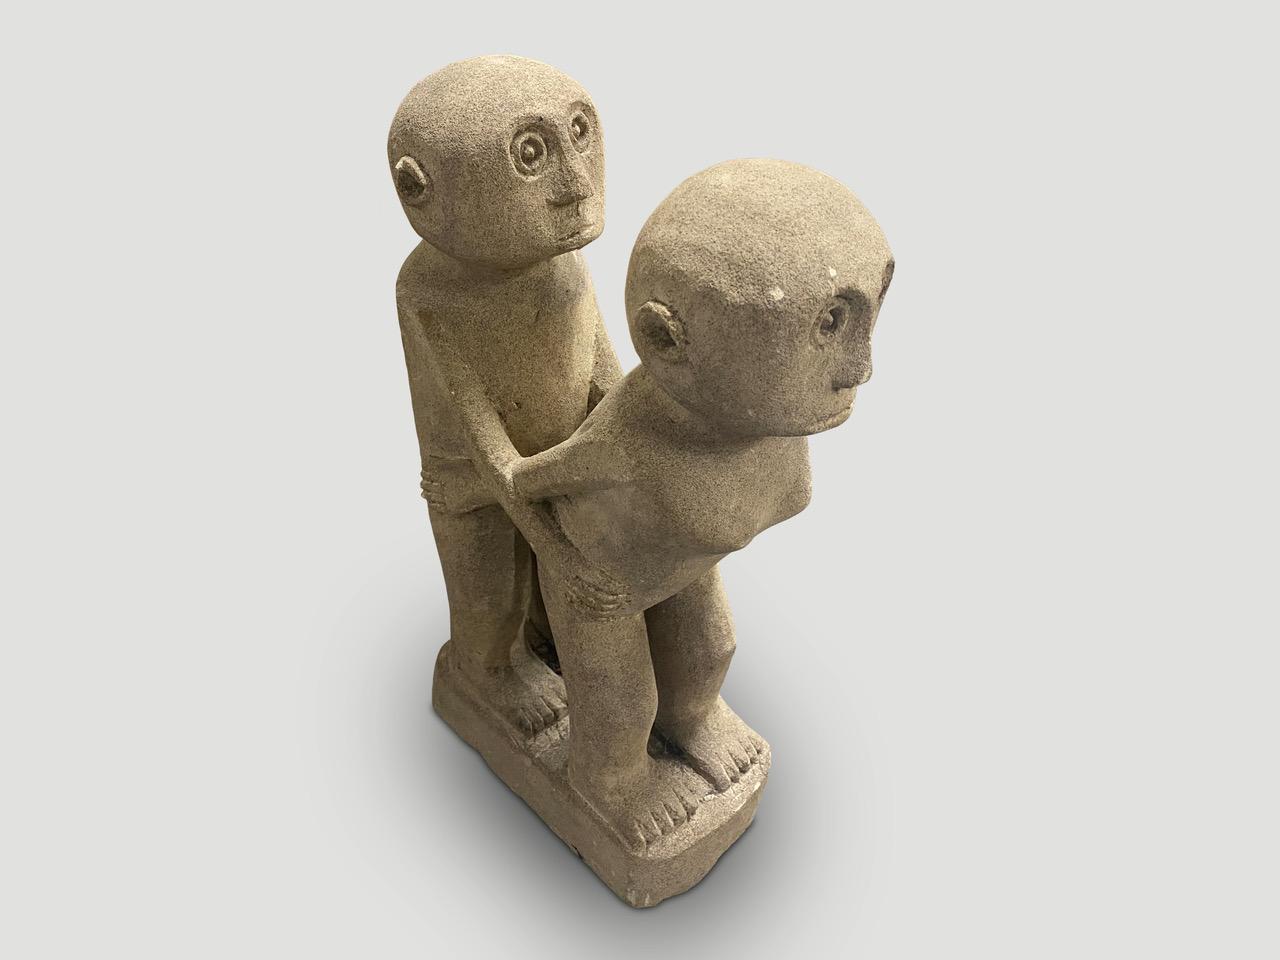 Sandstone husband and wife statue. Handmade from the island of Sumba.

This statue was handmade in the spirit of Wabi-Sabi, a Japanese philosophy that beauty can be found in imperfection and impermanence. It is a beauty of things modest and humble.